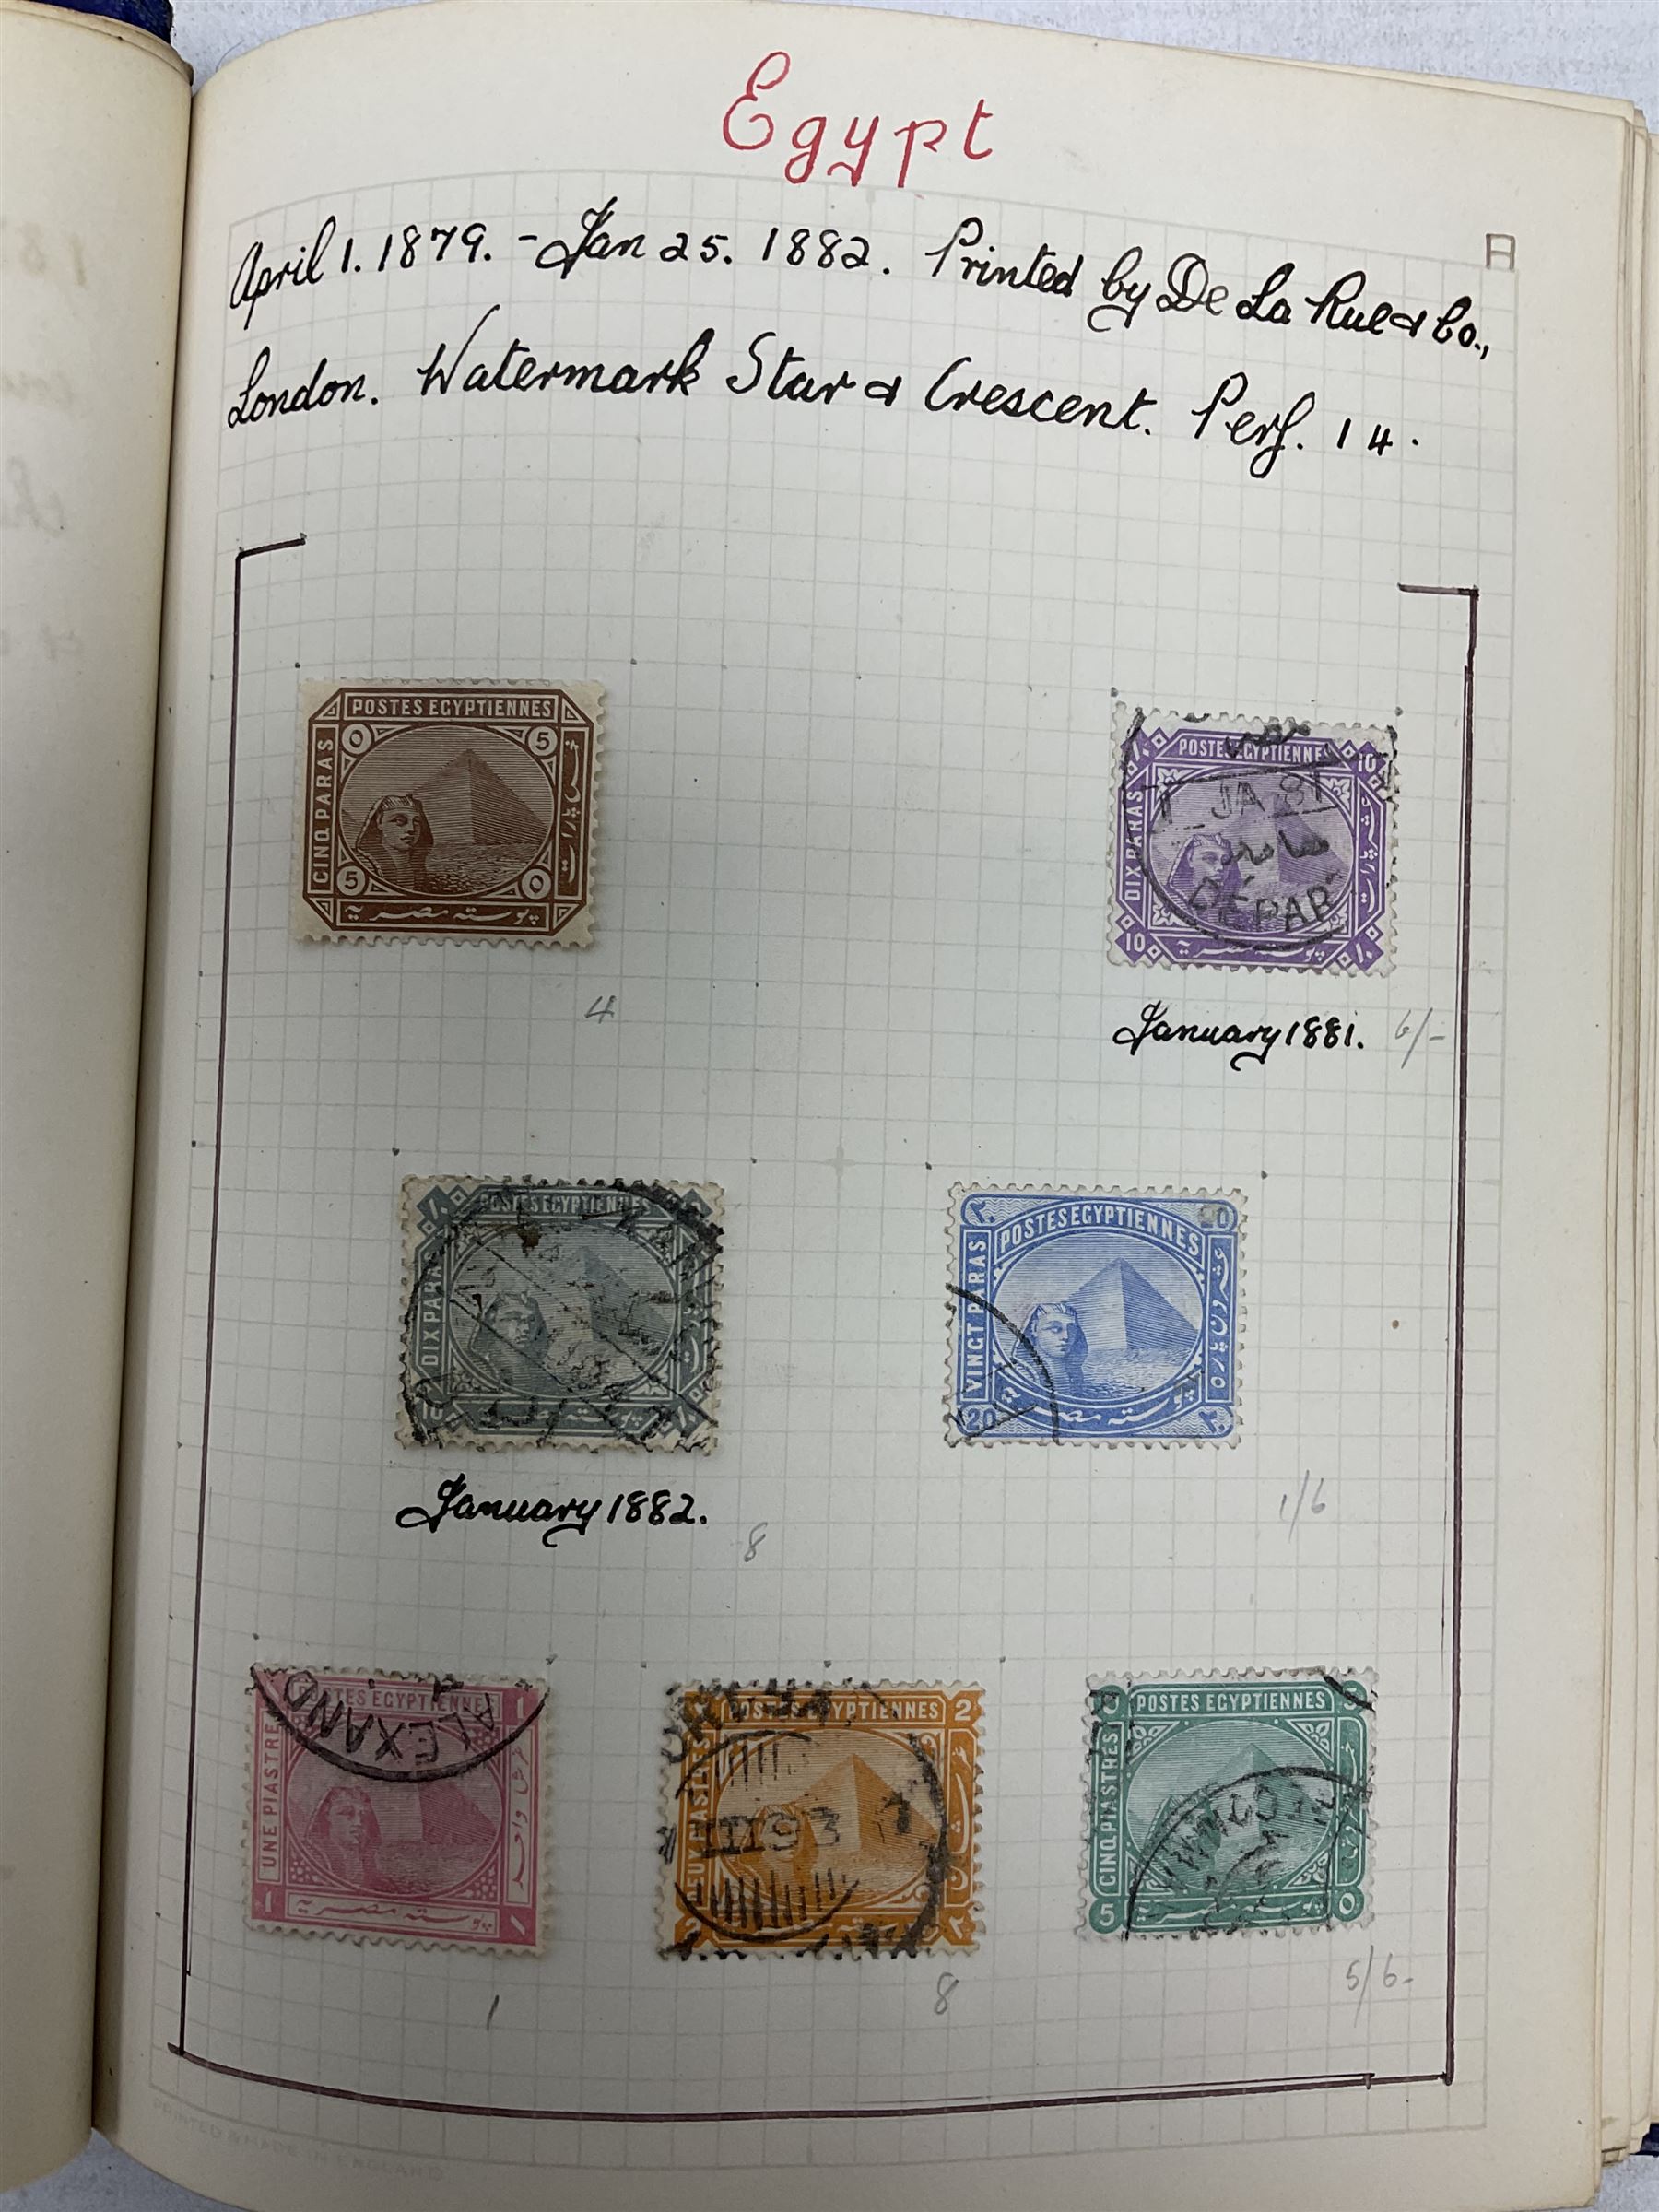 Egypt 1866 and later stamps - Image 633 of 761